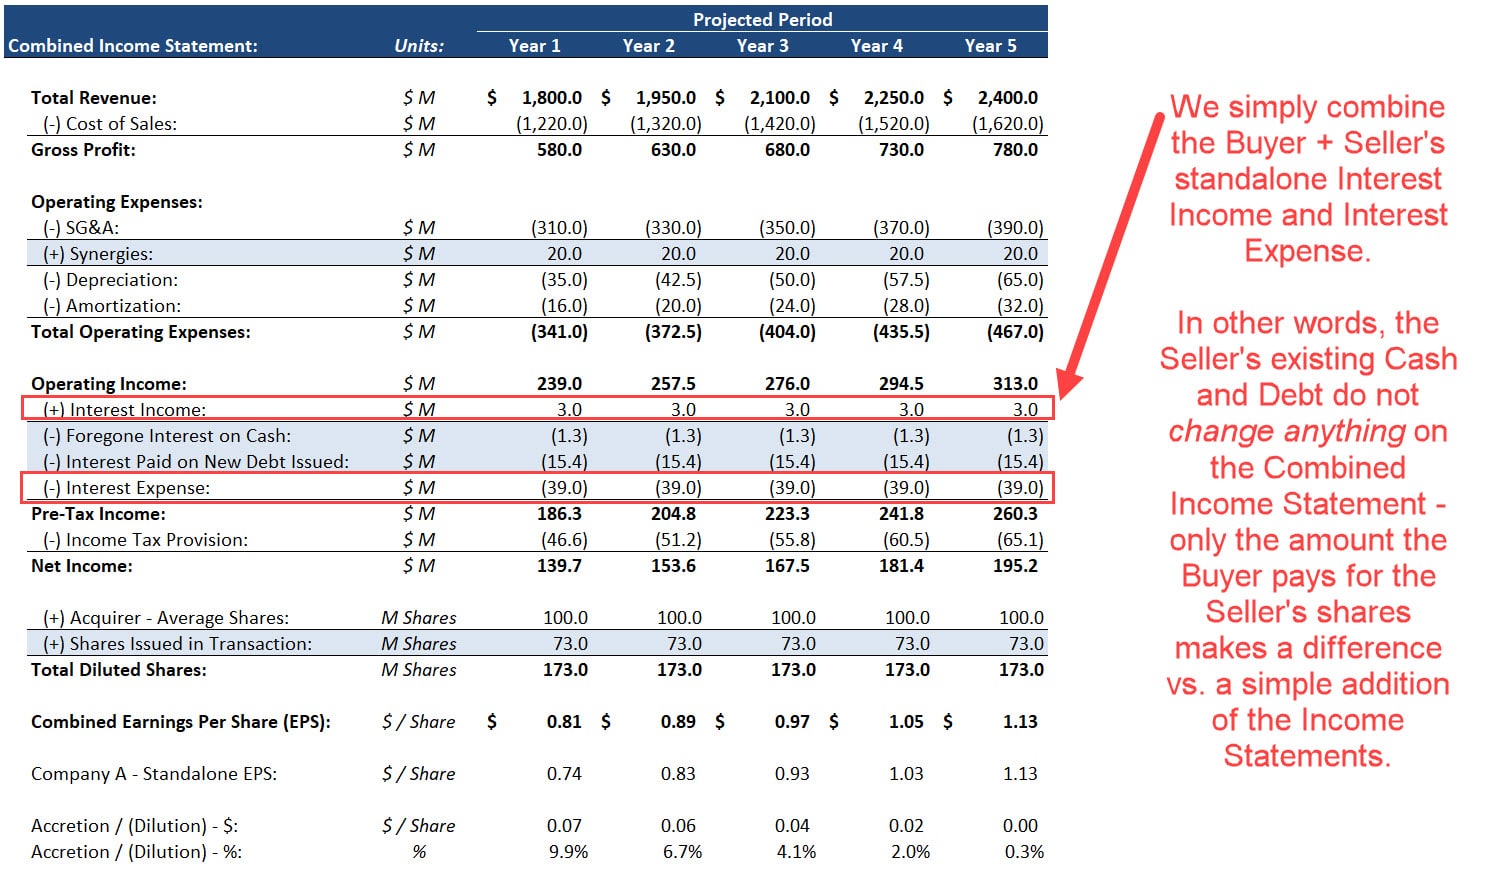 Combined Income Statement and the Seller's Cash and Debt